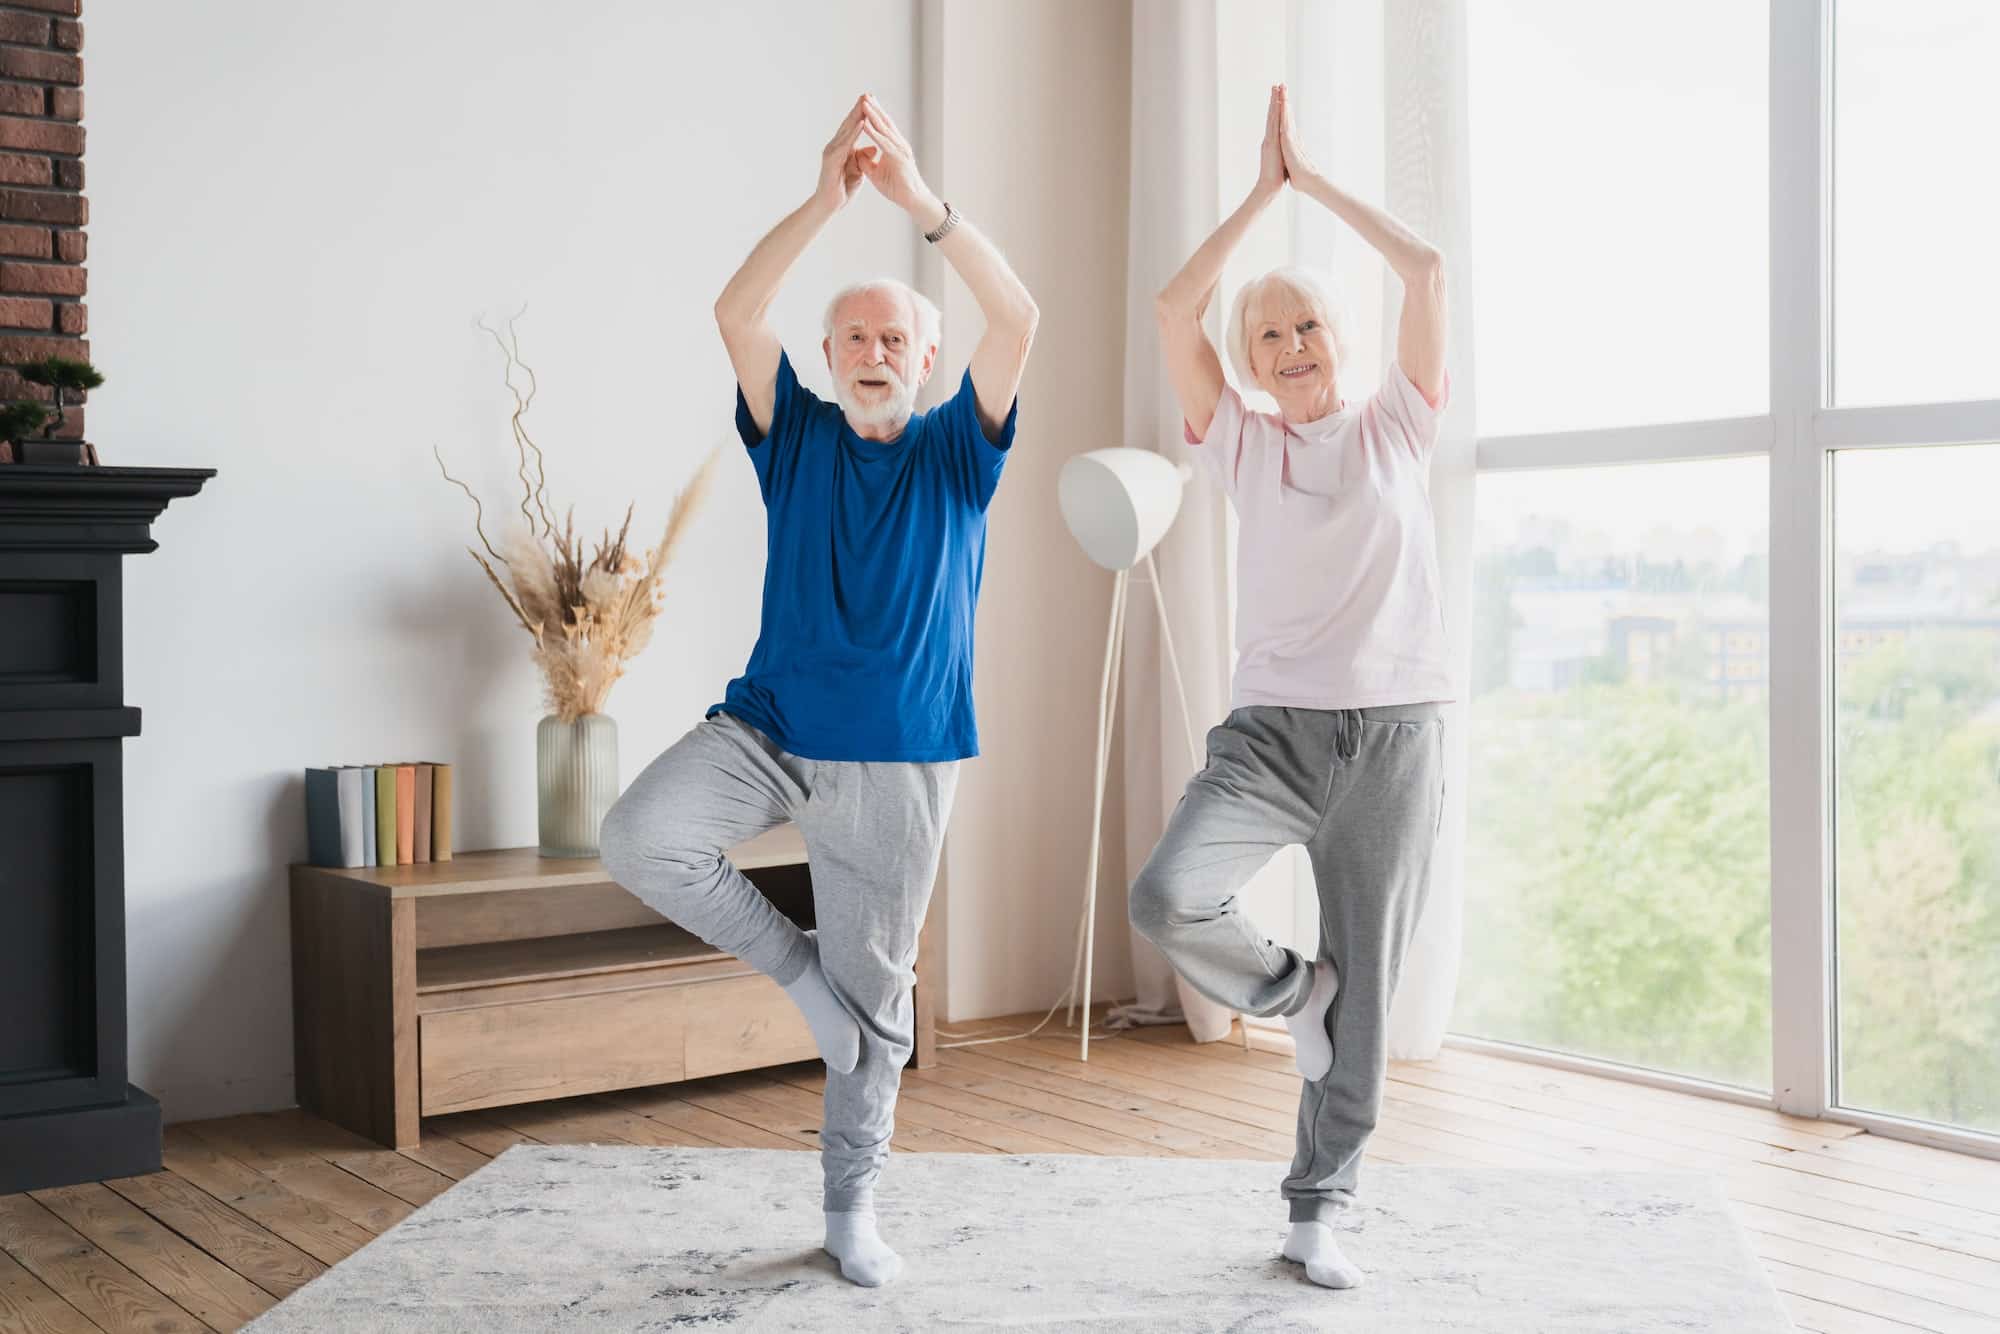 Grandparents training stretching doing yoga exercises at home on lockdown together keeping balance